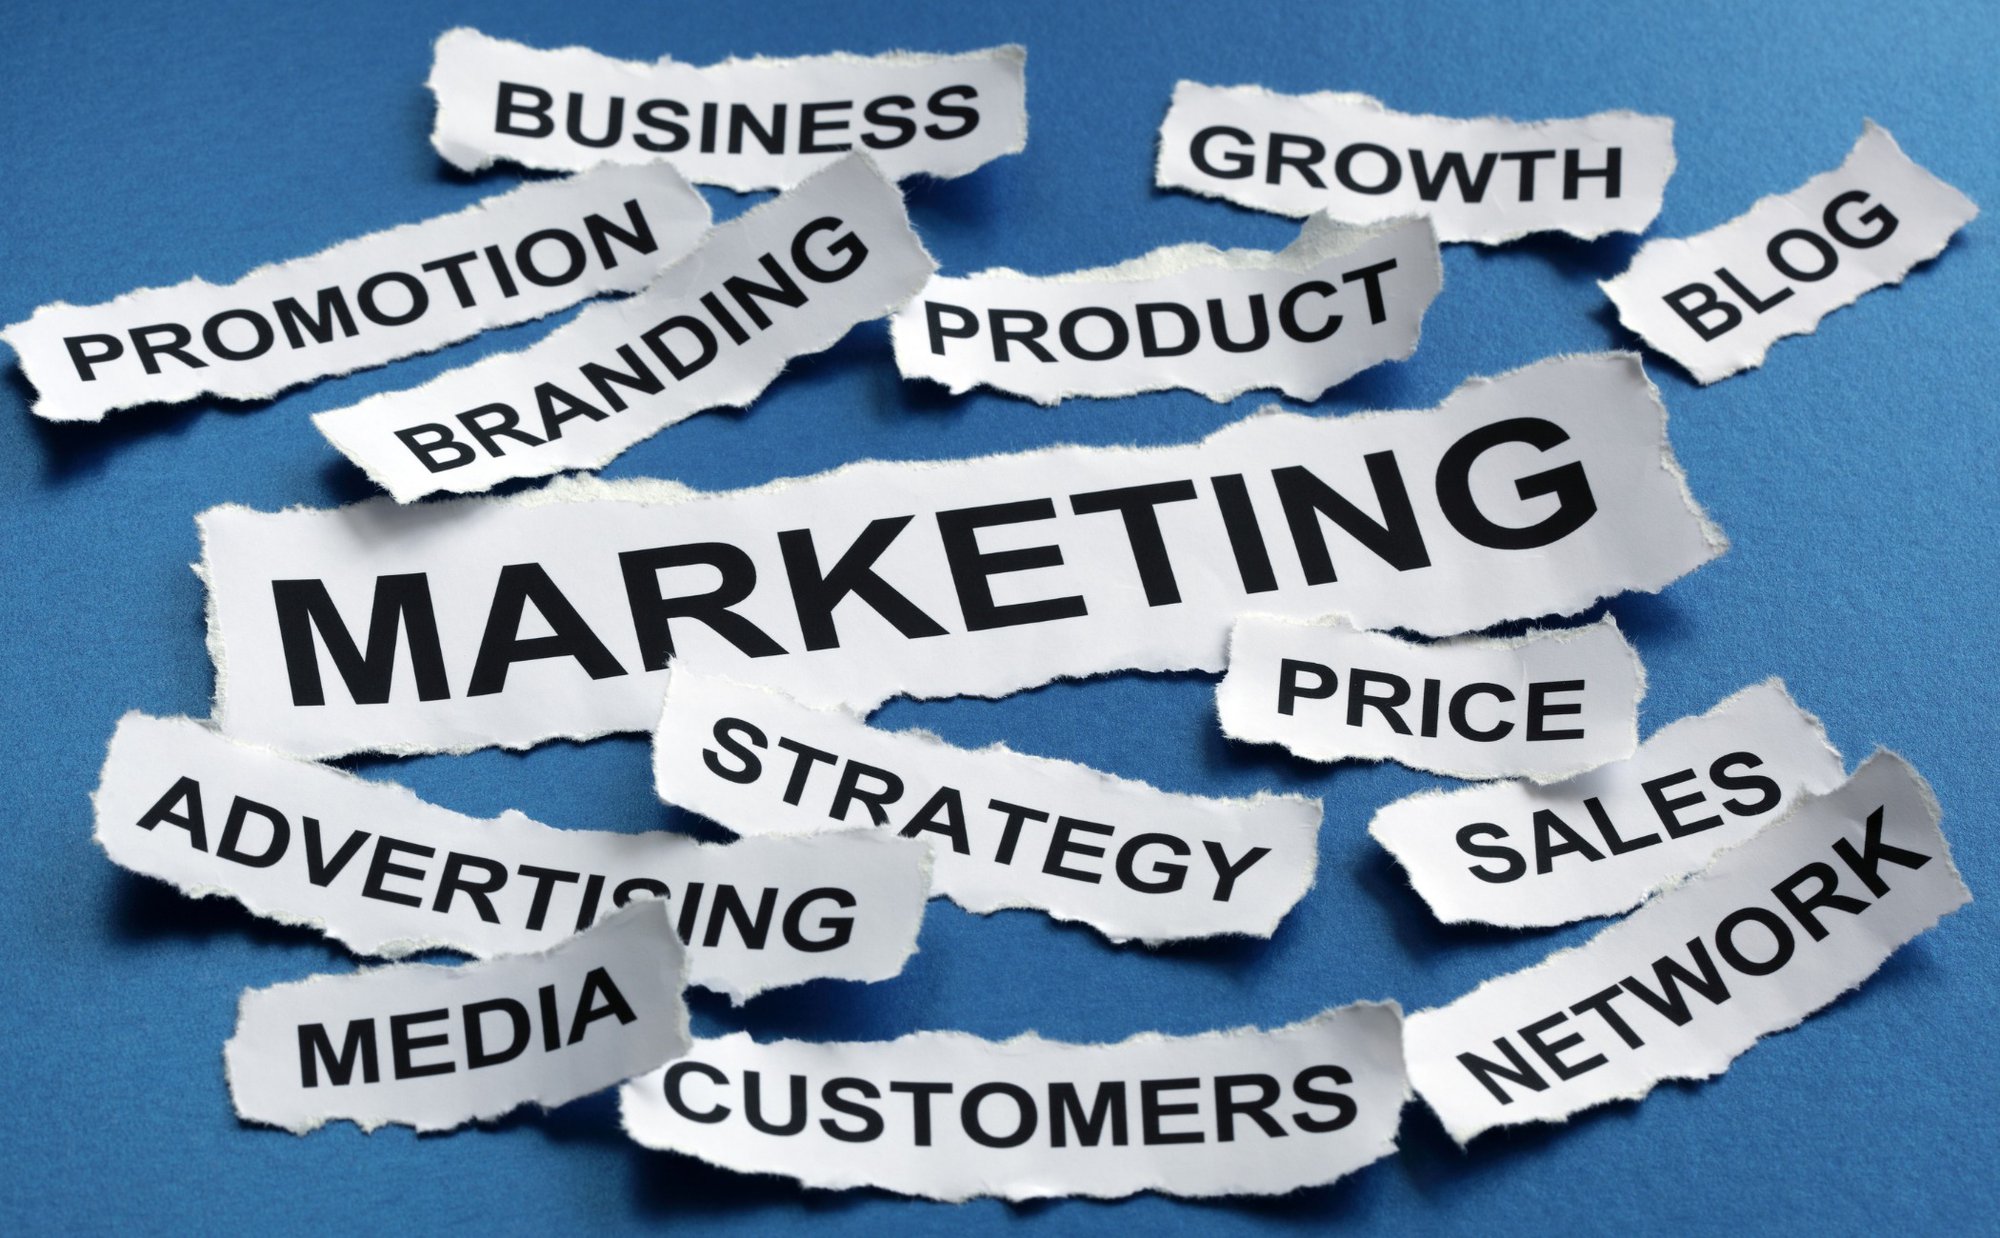 Marketing Consulting Firms in the US: Here's Our 35 Picks